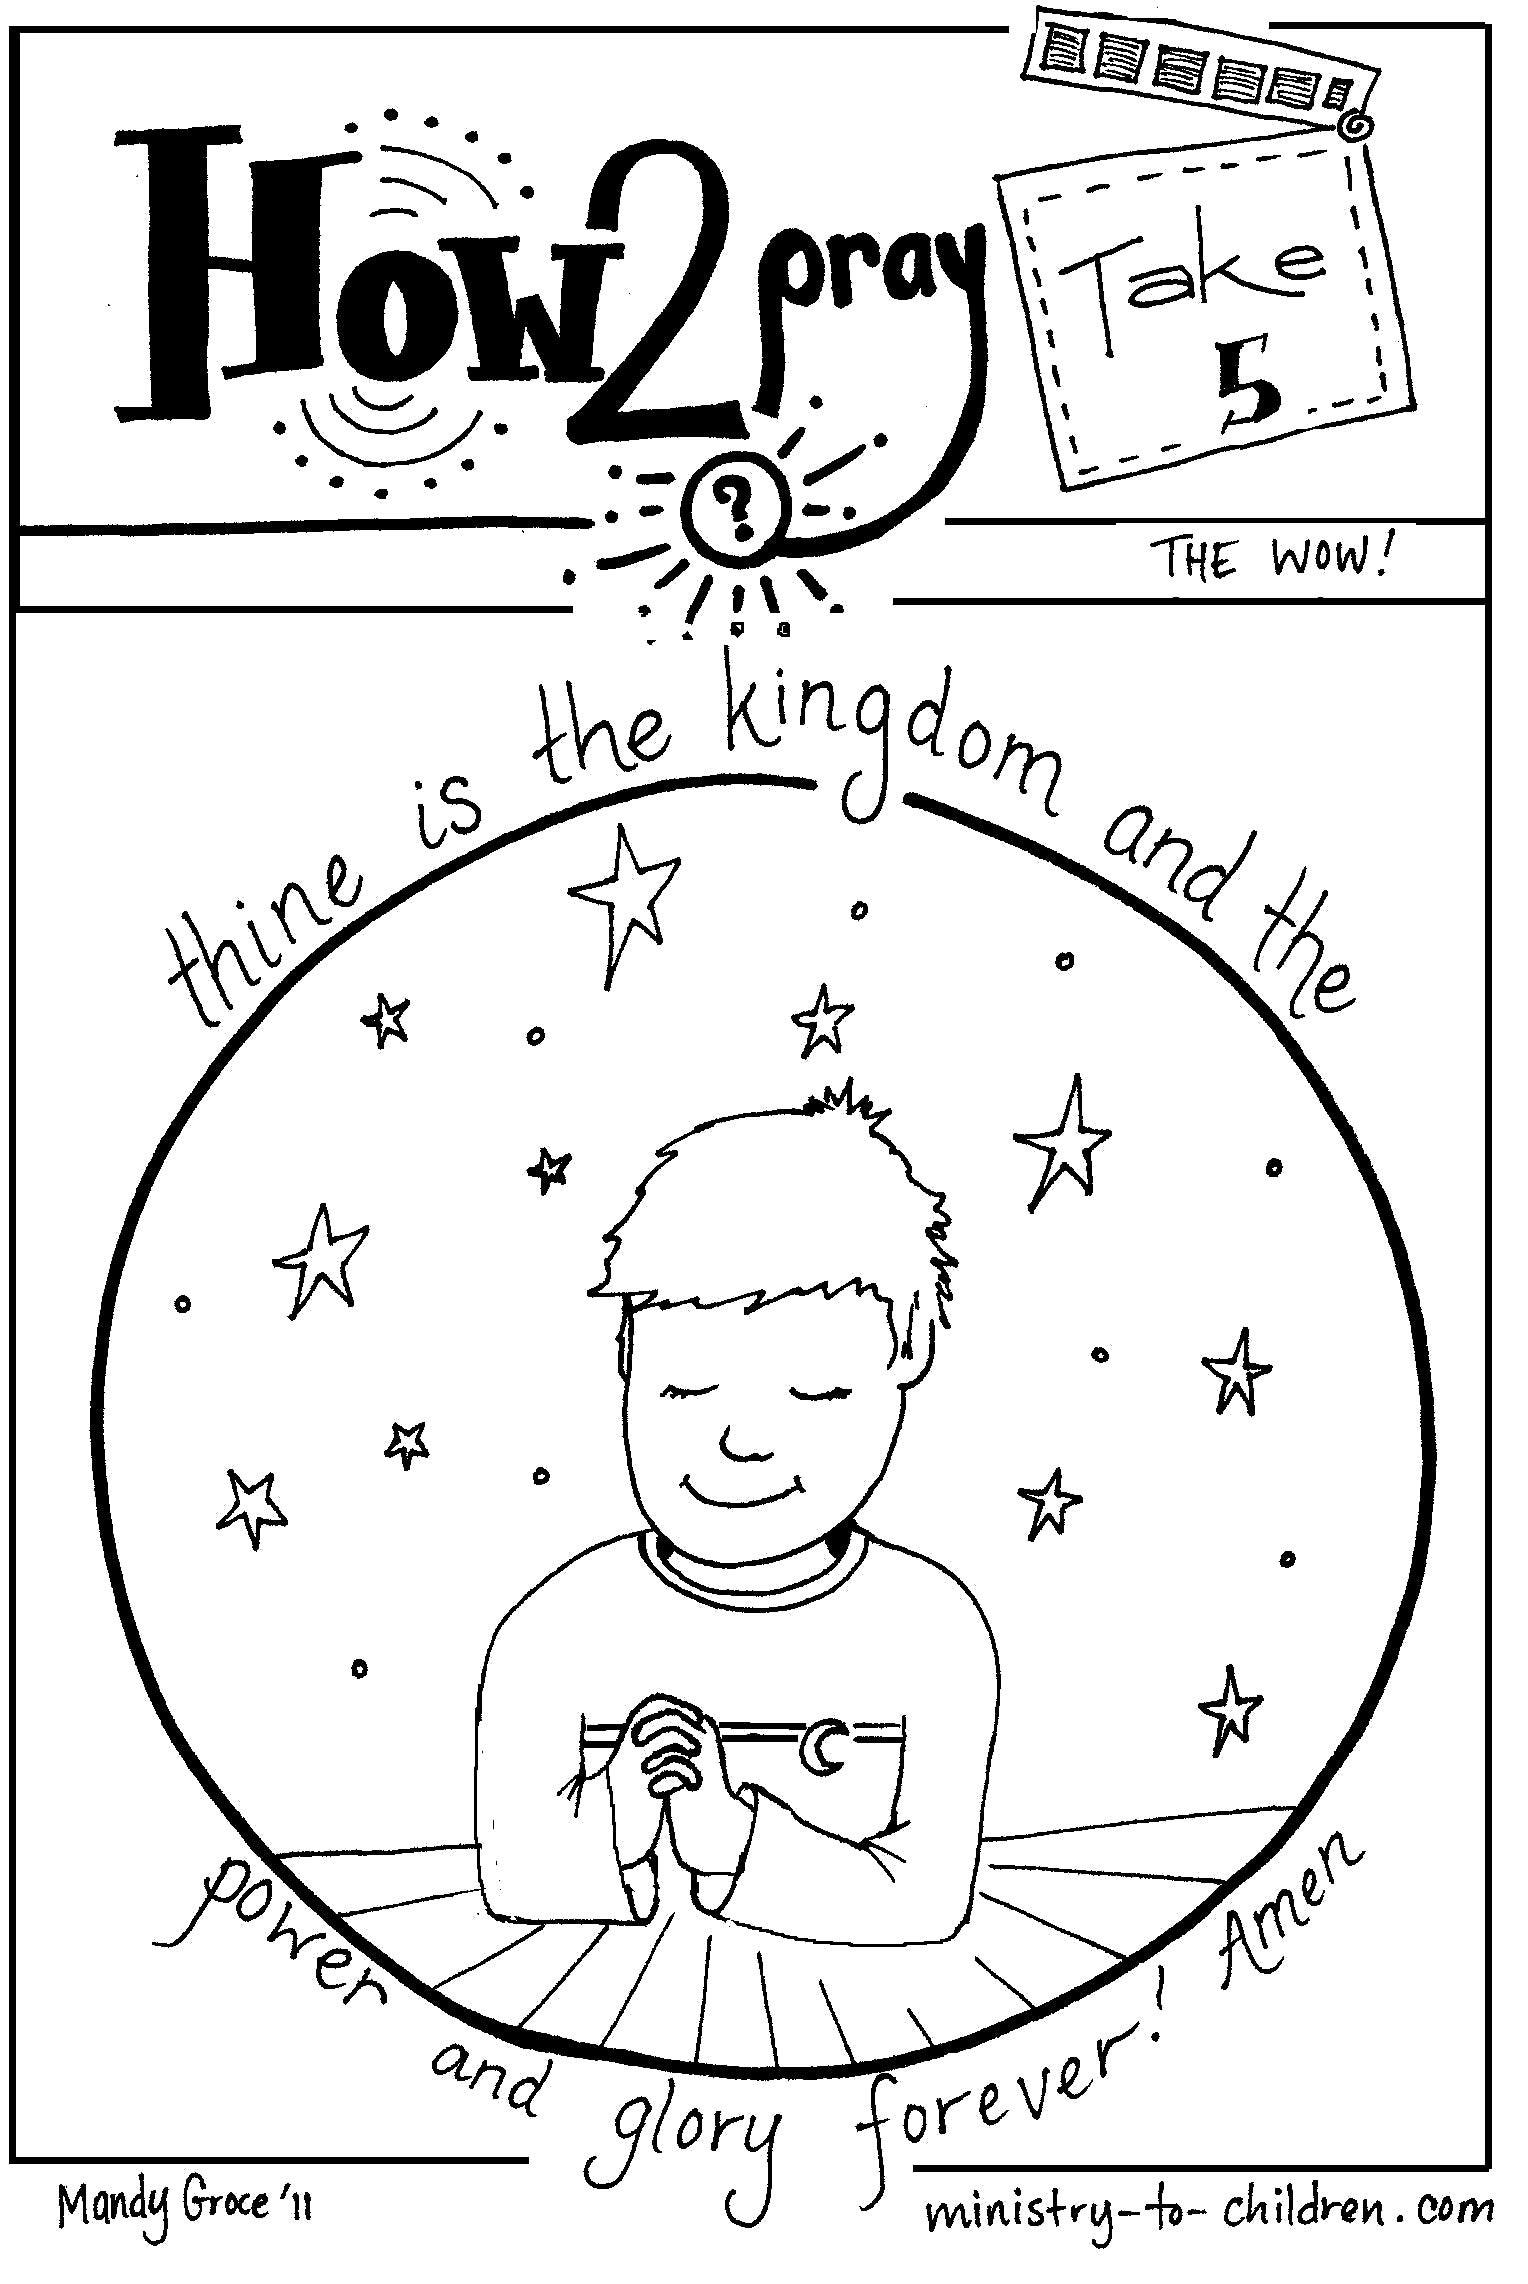 The lords prayer coloring book for kids free pages download only